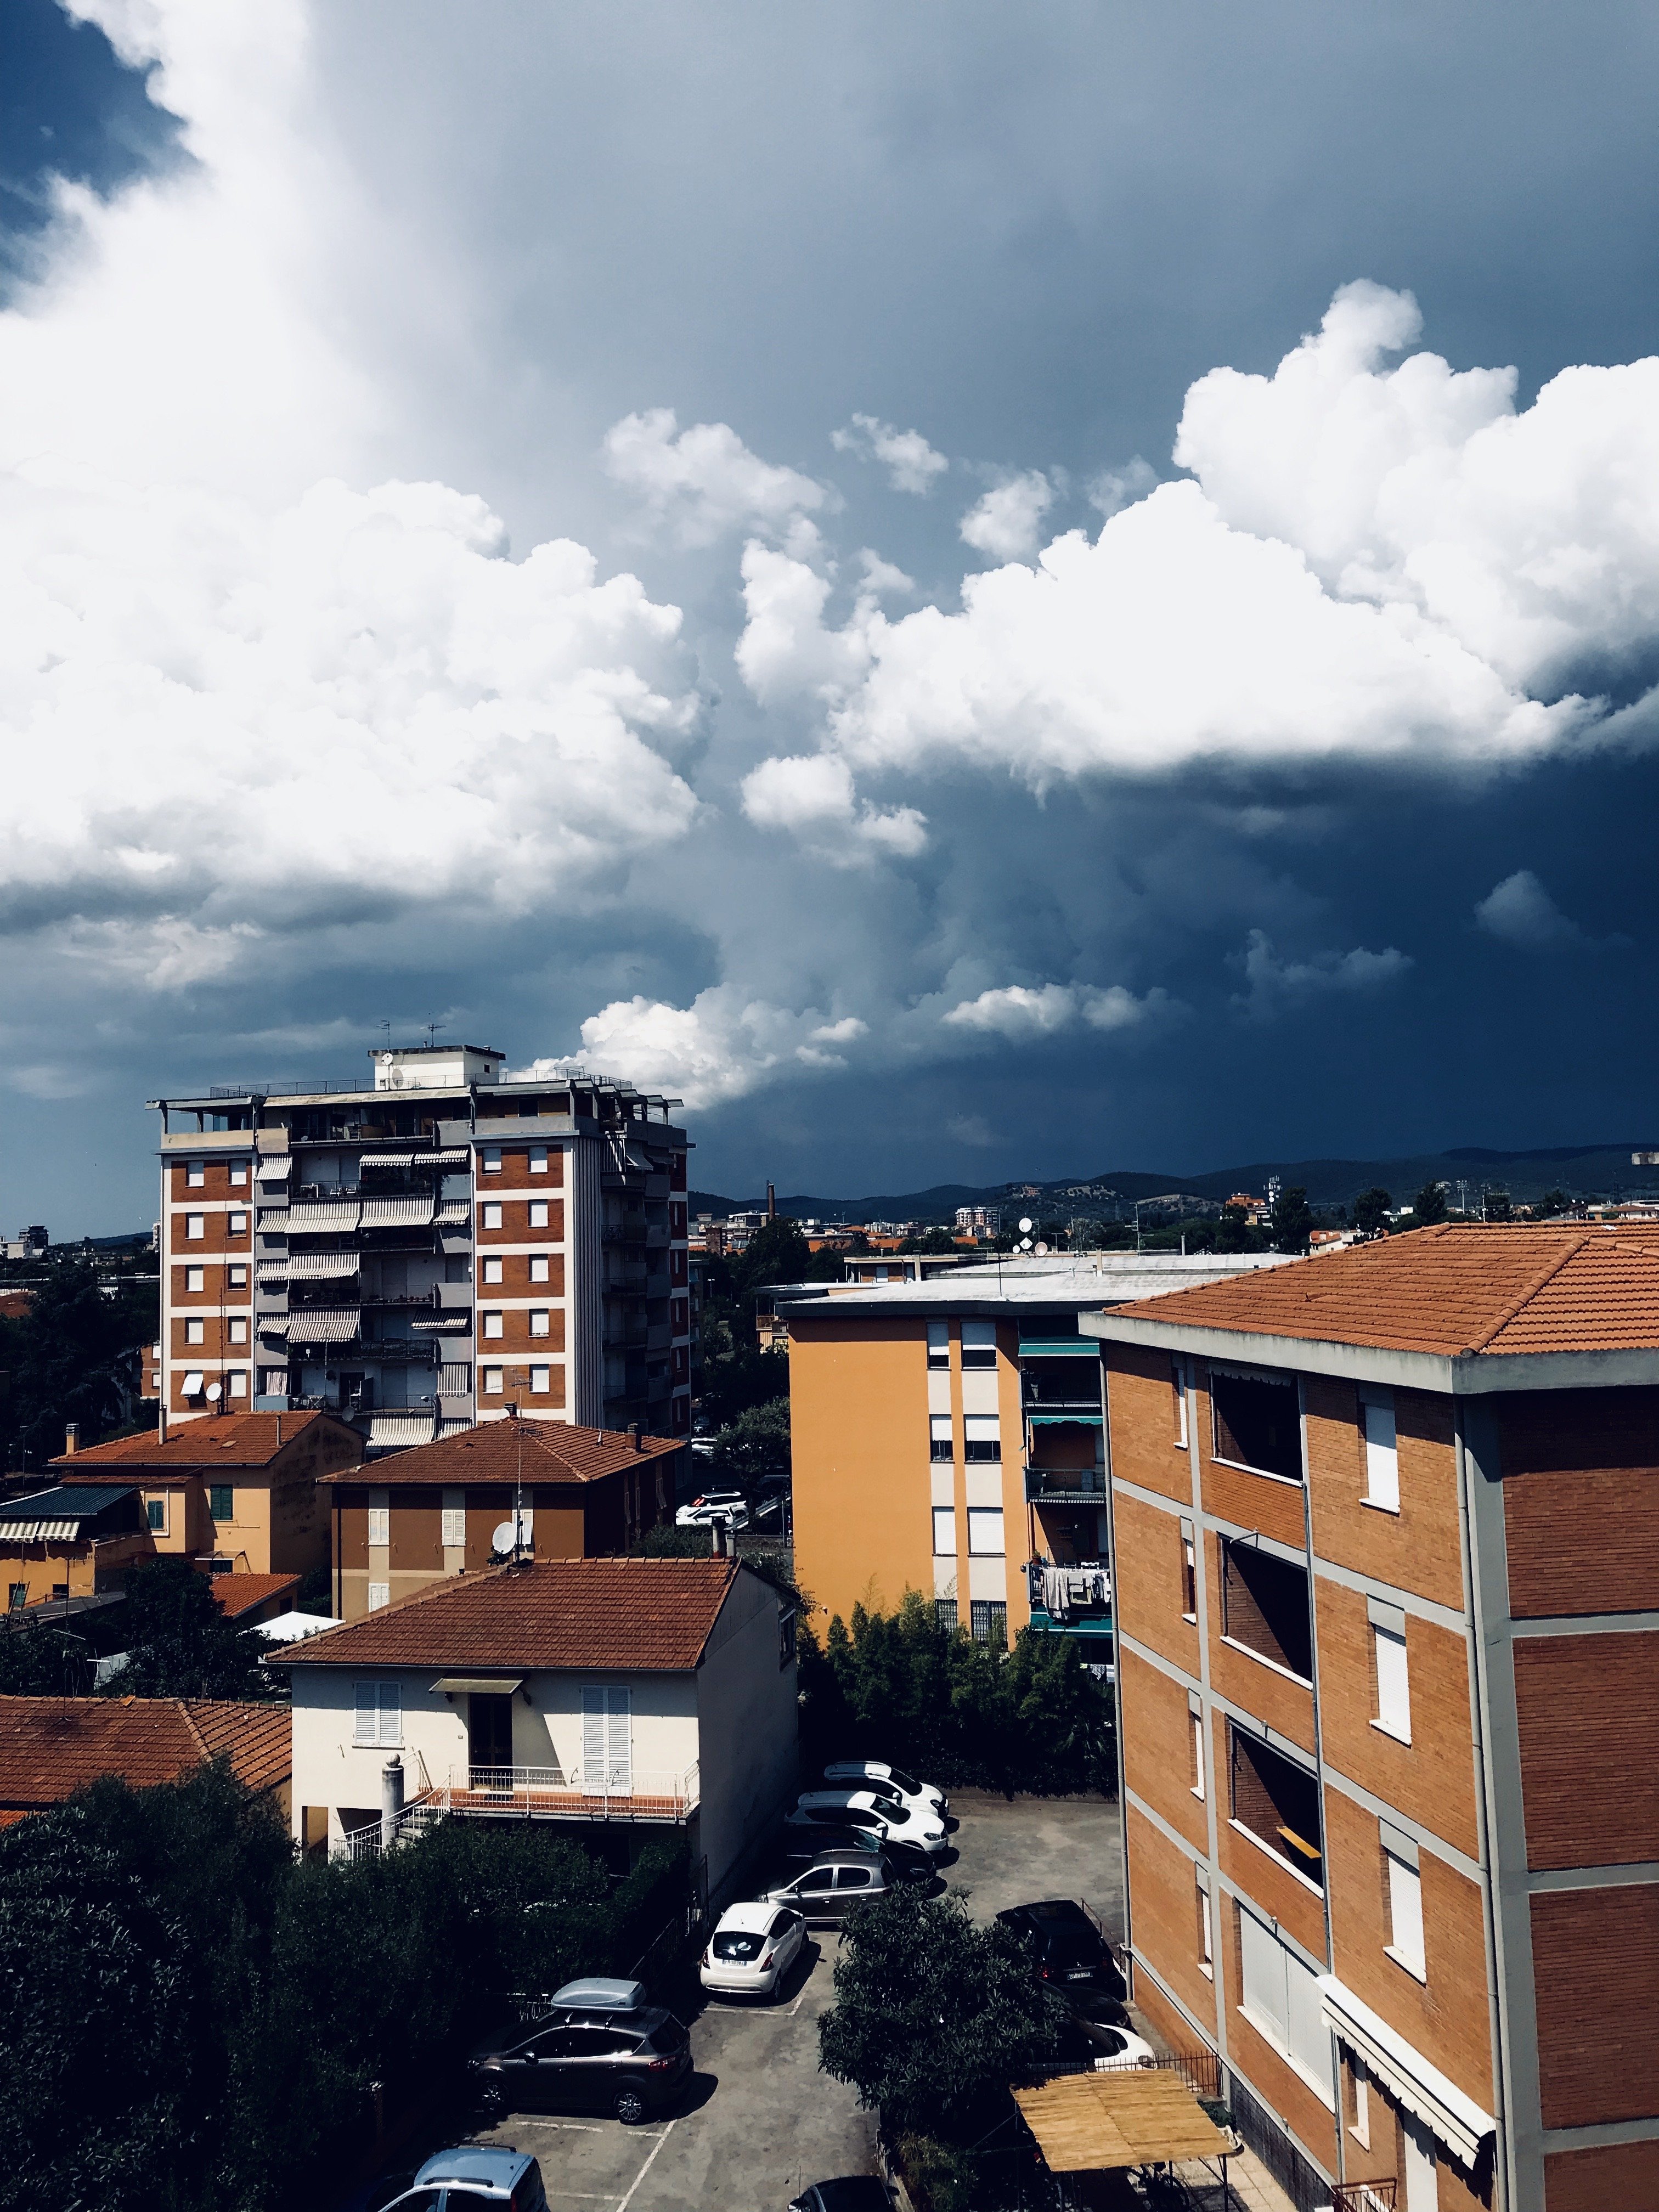 18 August 2018 📷    Sky with clouds     Follonica, Tuscany, Italy